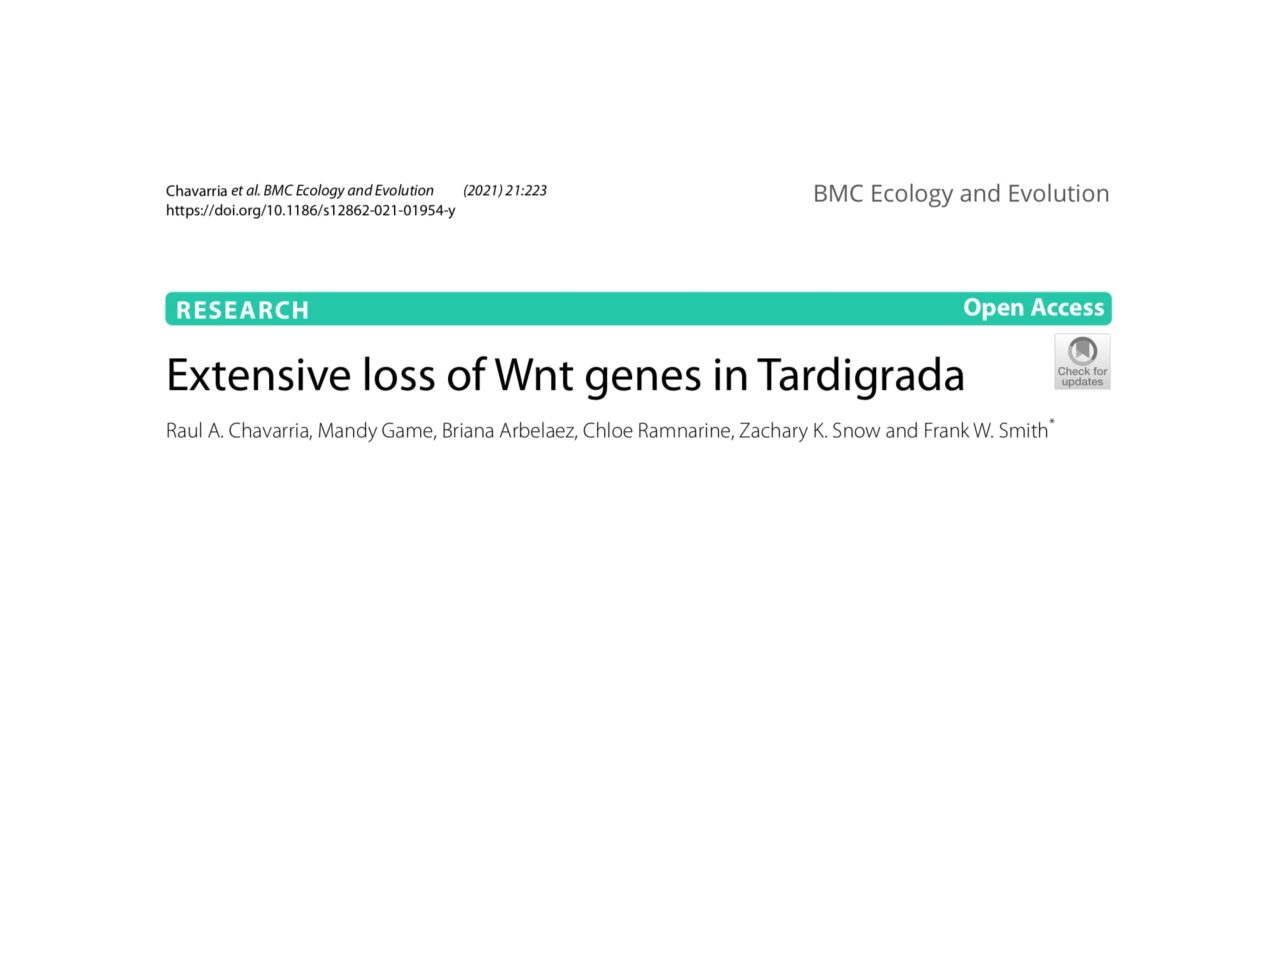 Raul publishes a paper in BMC Ecology and Evolution!